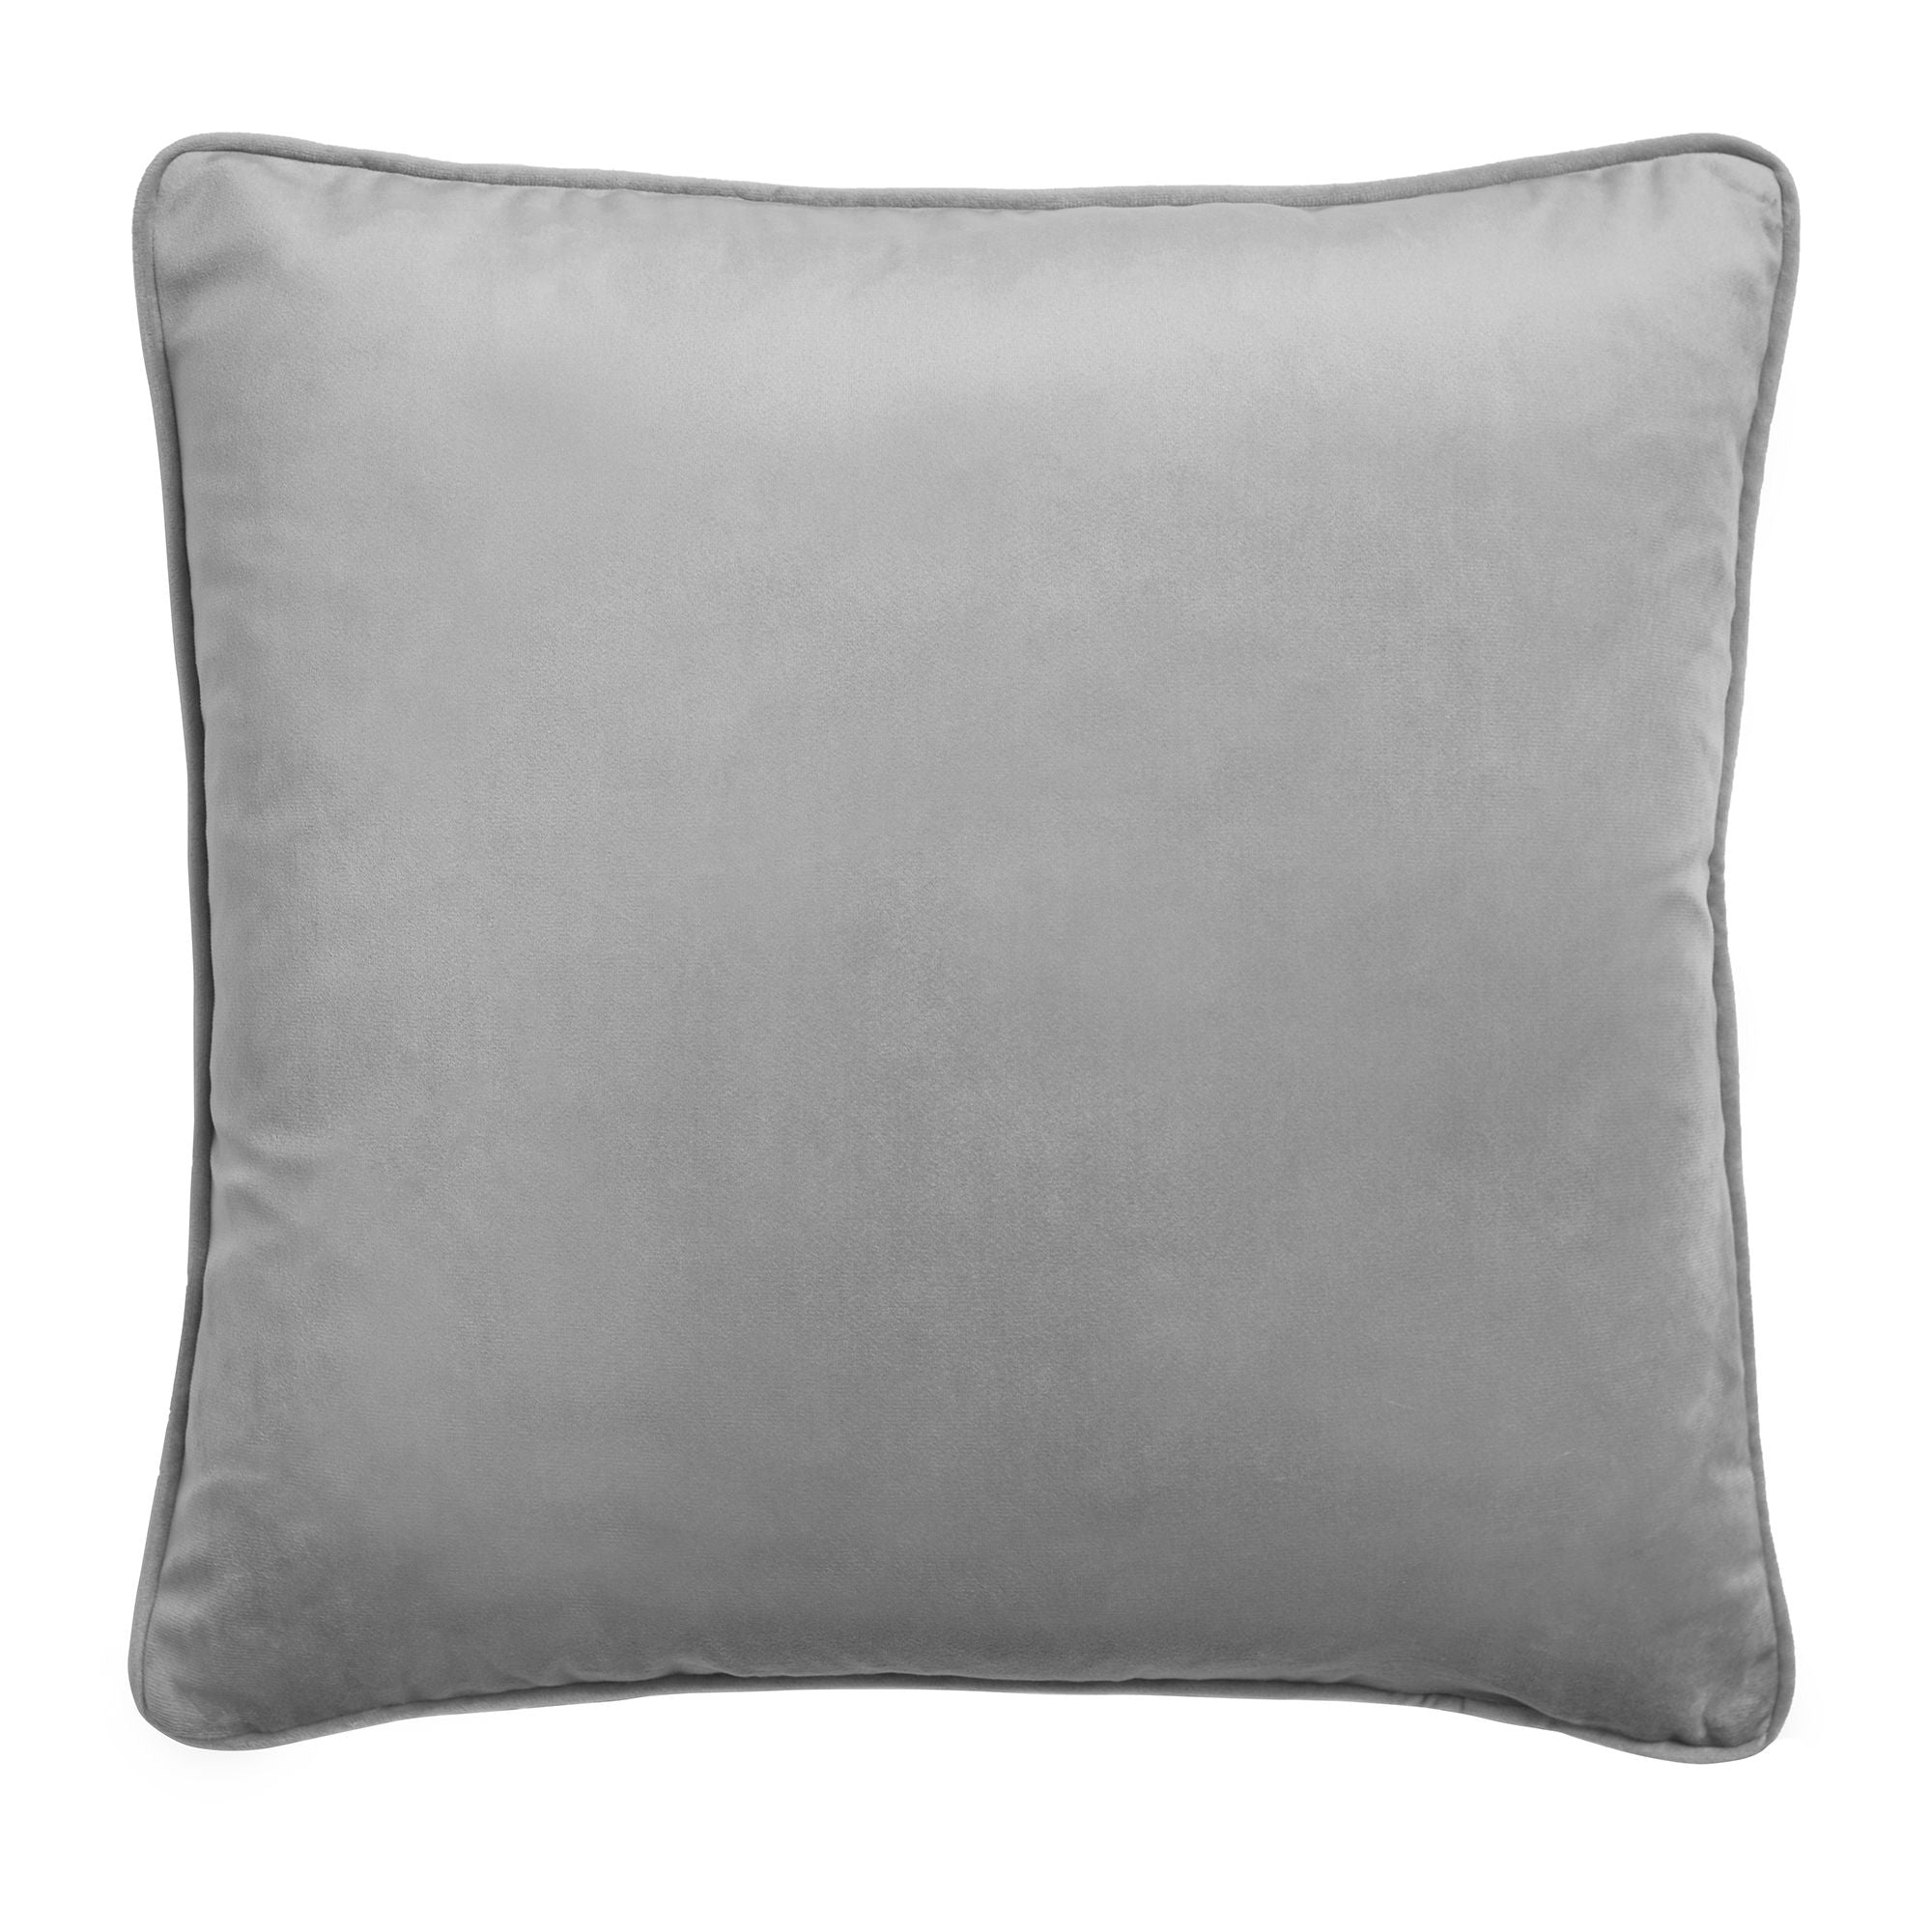 Montrose Cushion by Laurence Llewelyn-Bowen in Silver 43 x 43cm - Cushion - Laurence Llewelyn-Bowen